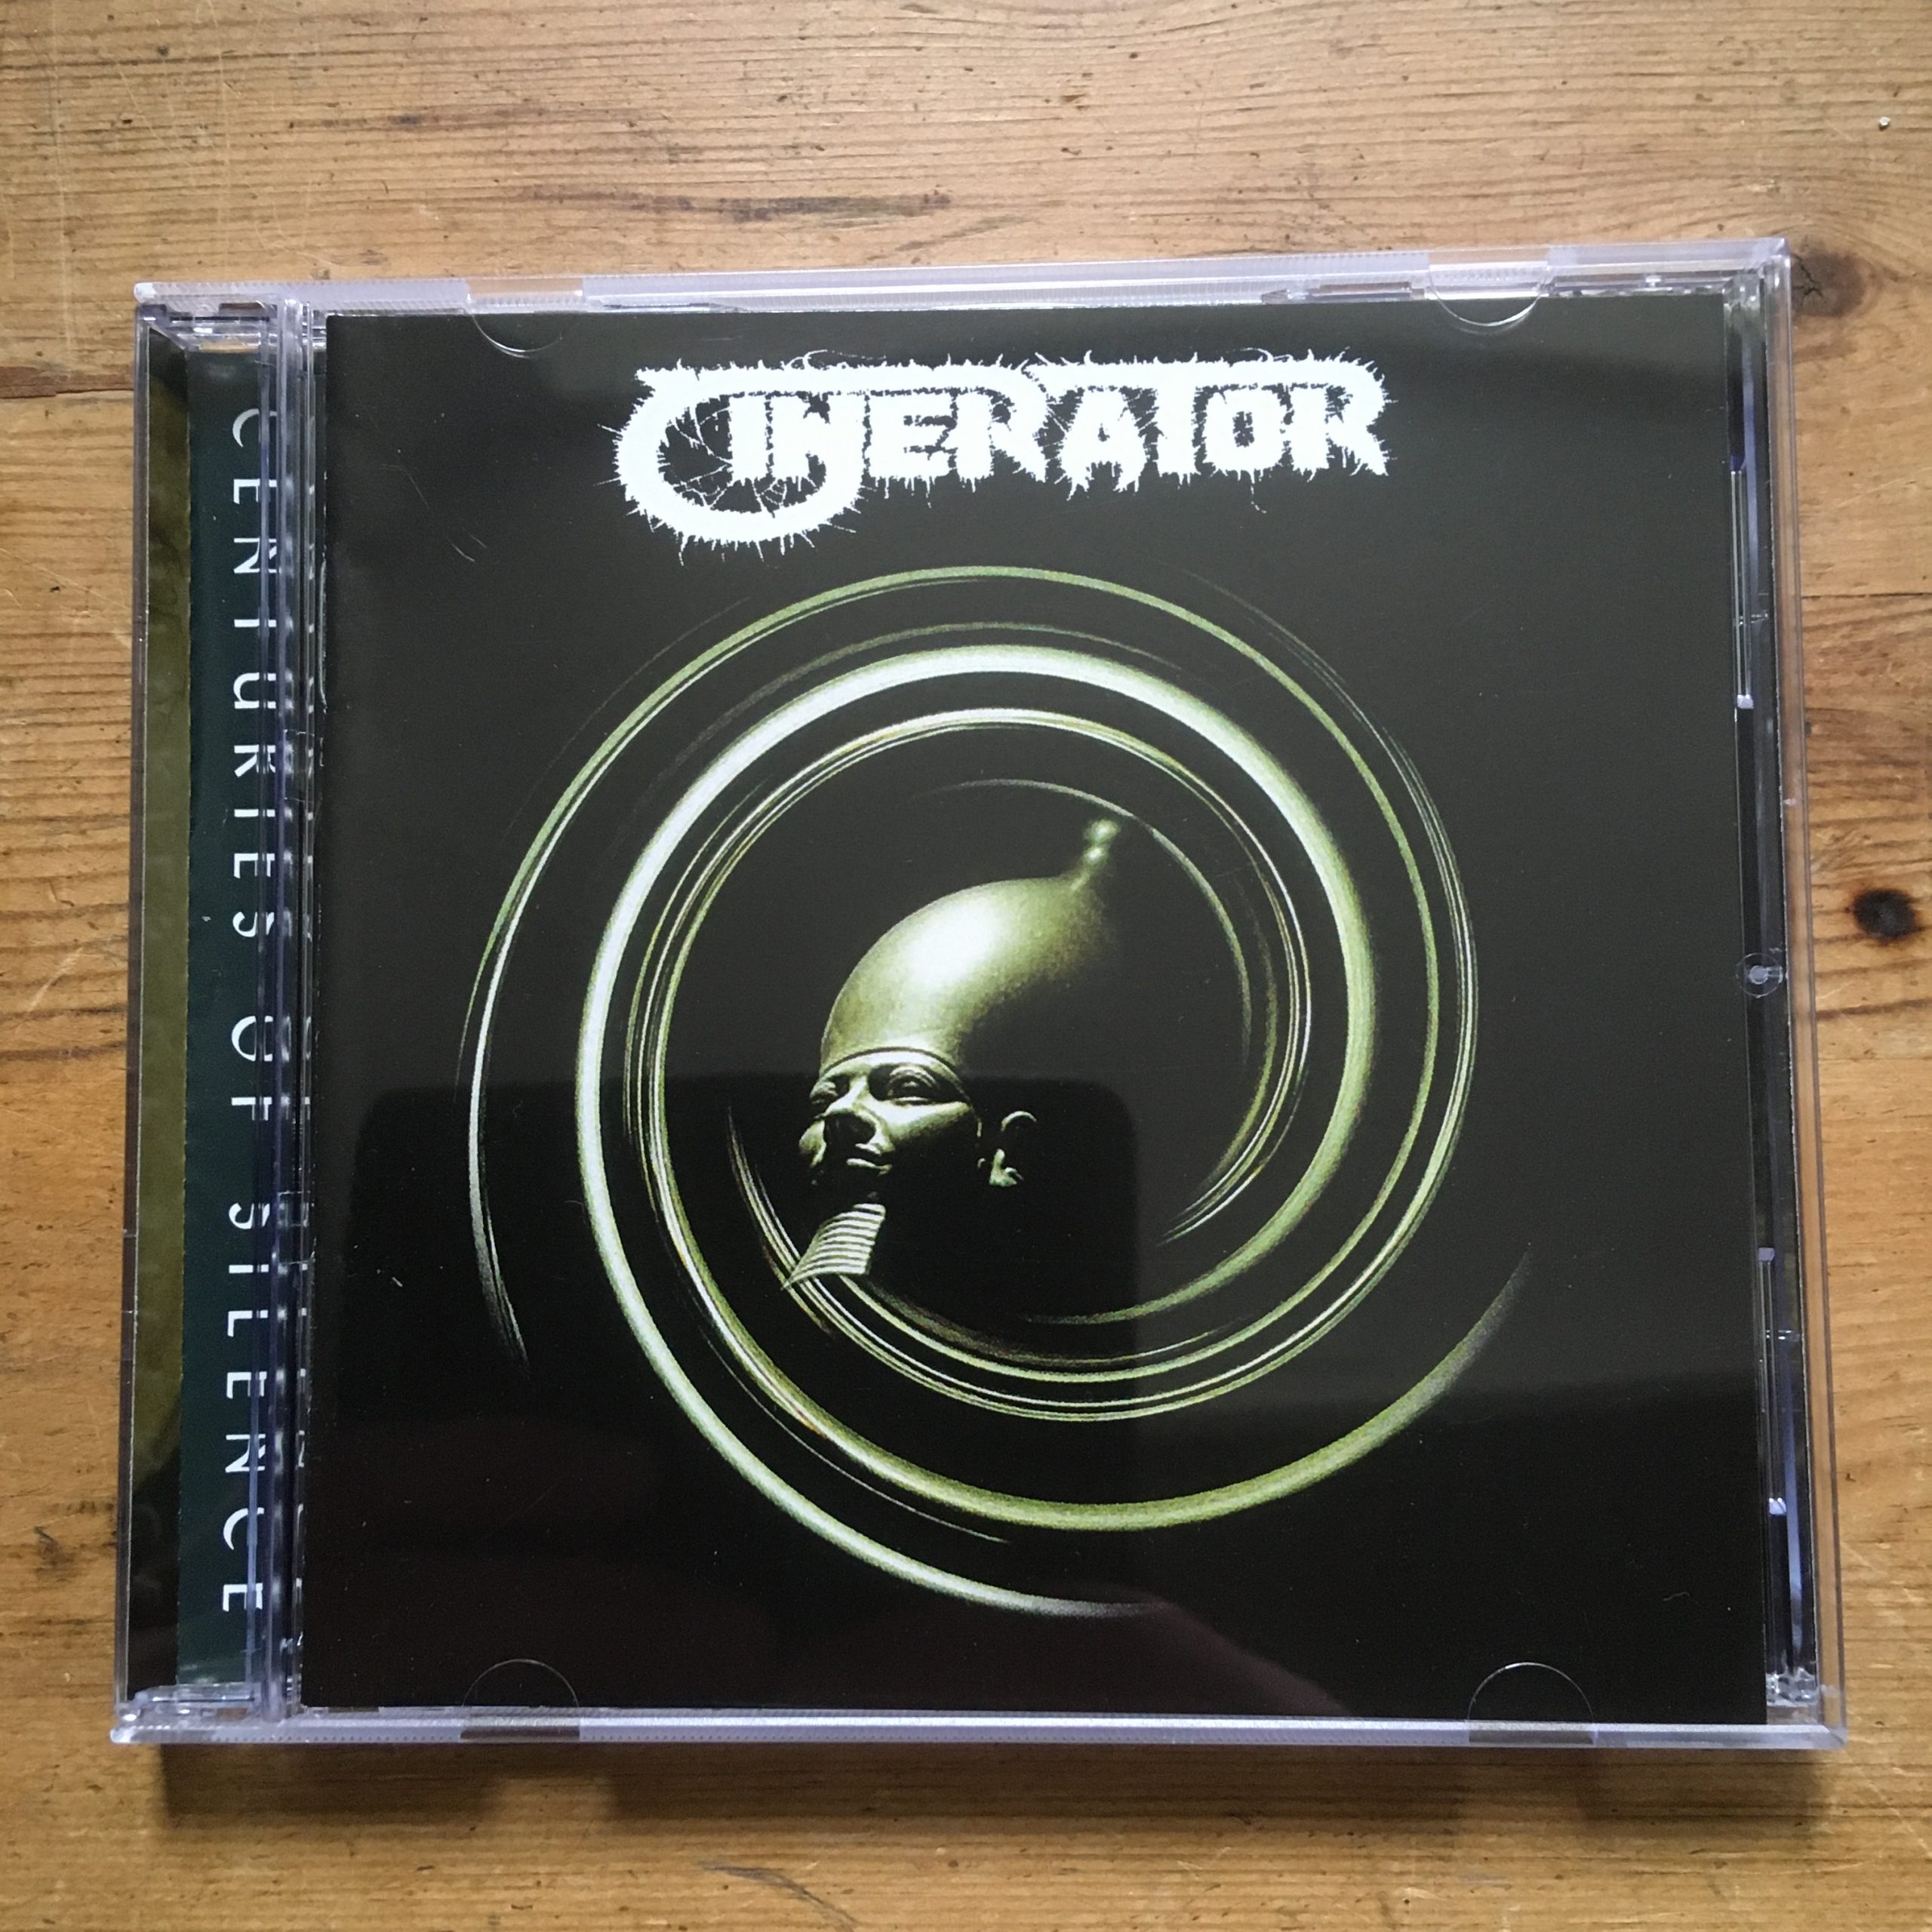 Photo of the Cinerator - "Centuries of Silence + Demos" 2CD